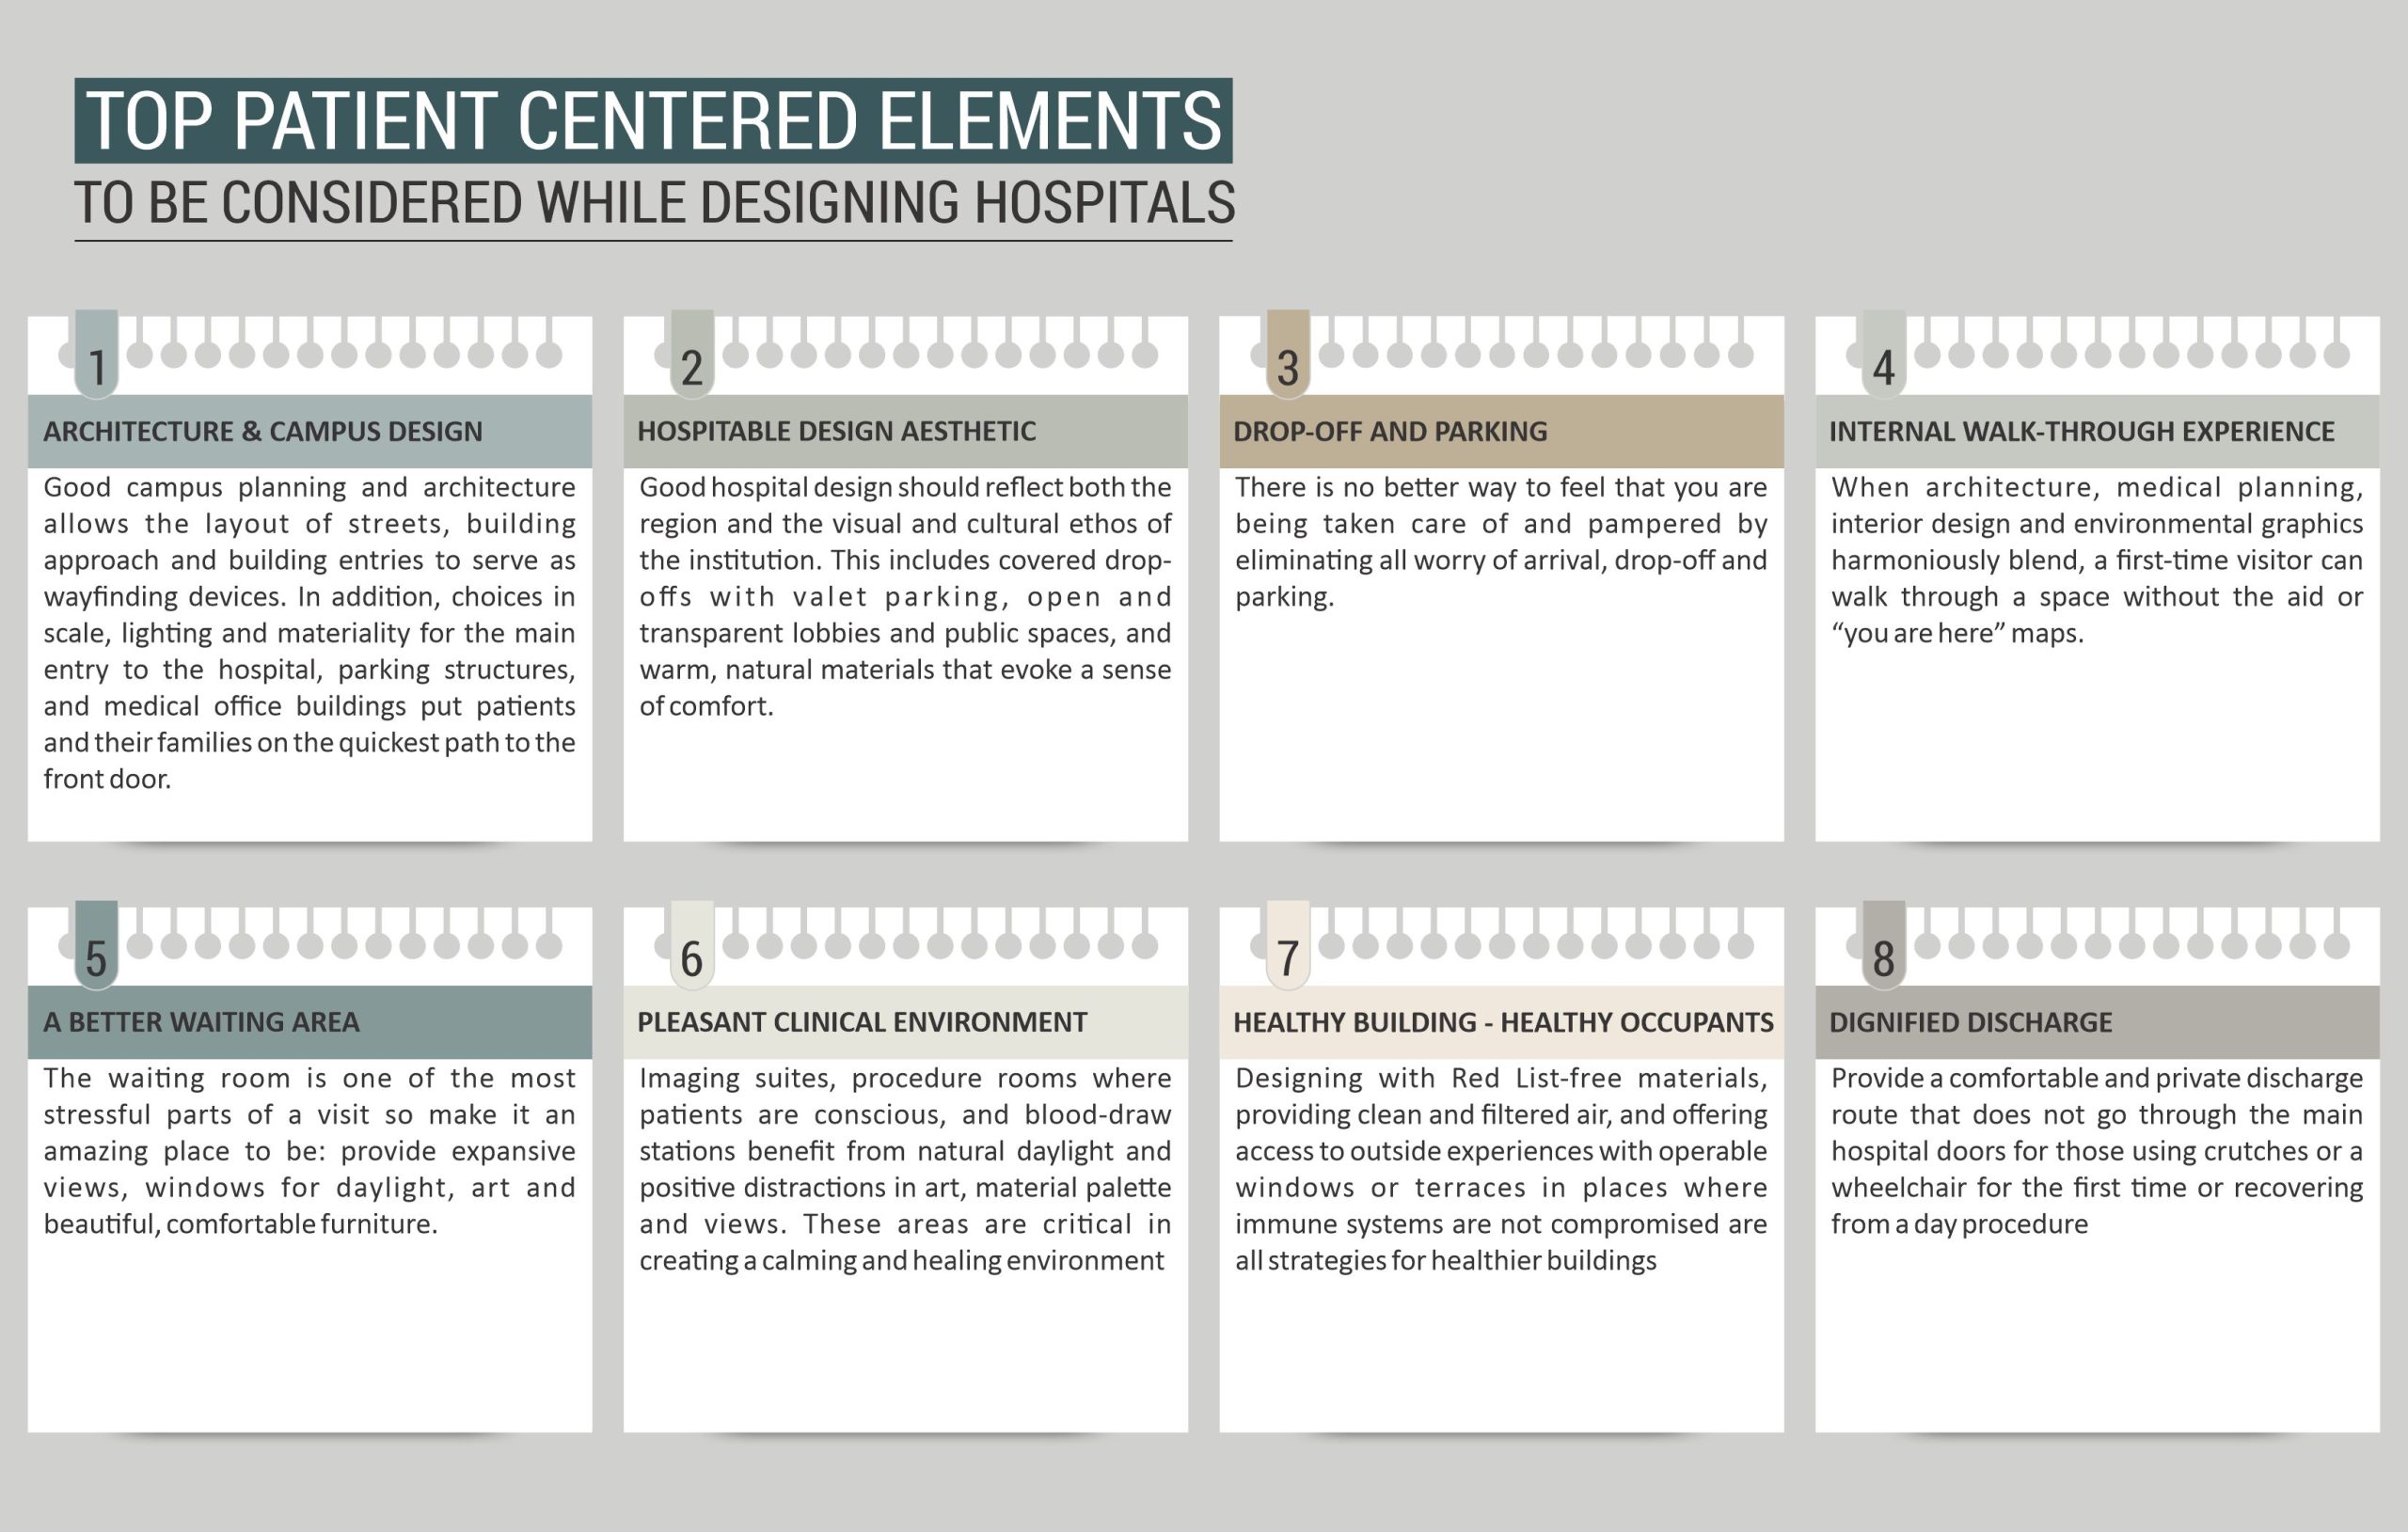 Top Patient Centered Elements to be considered while Designing Hospitals_Infographic_Russell and Dawson